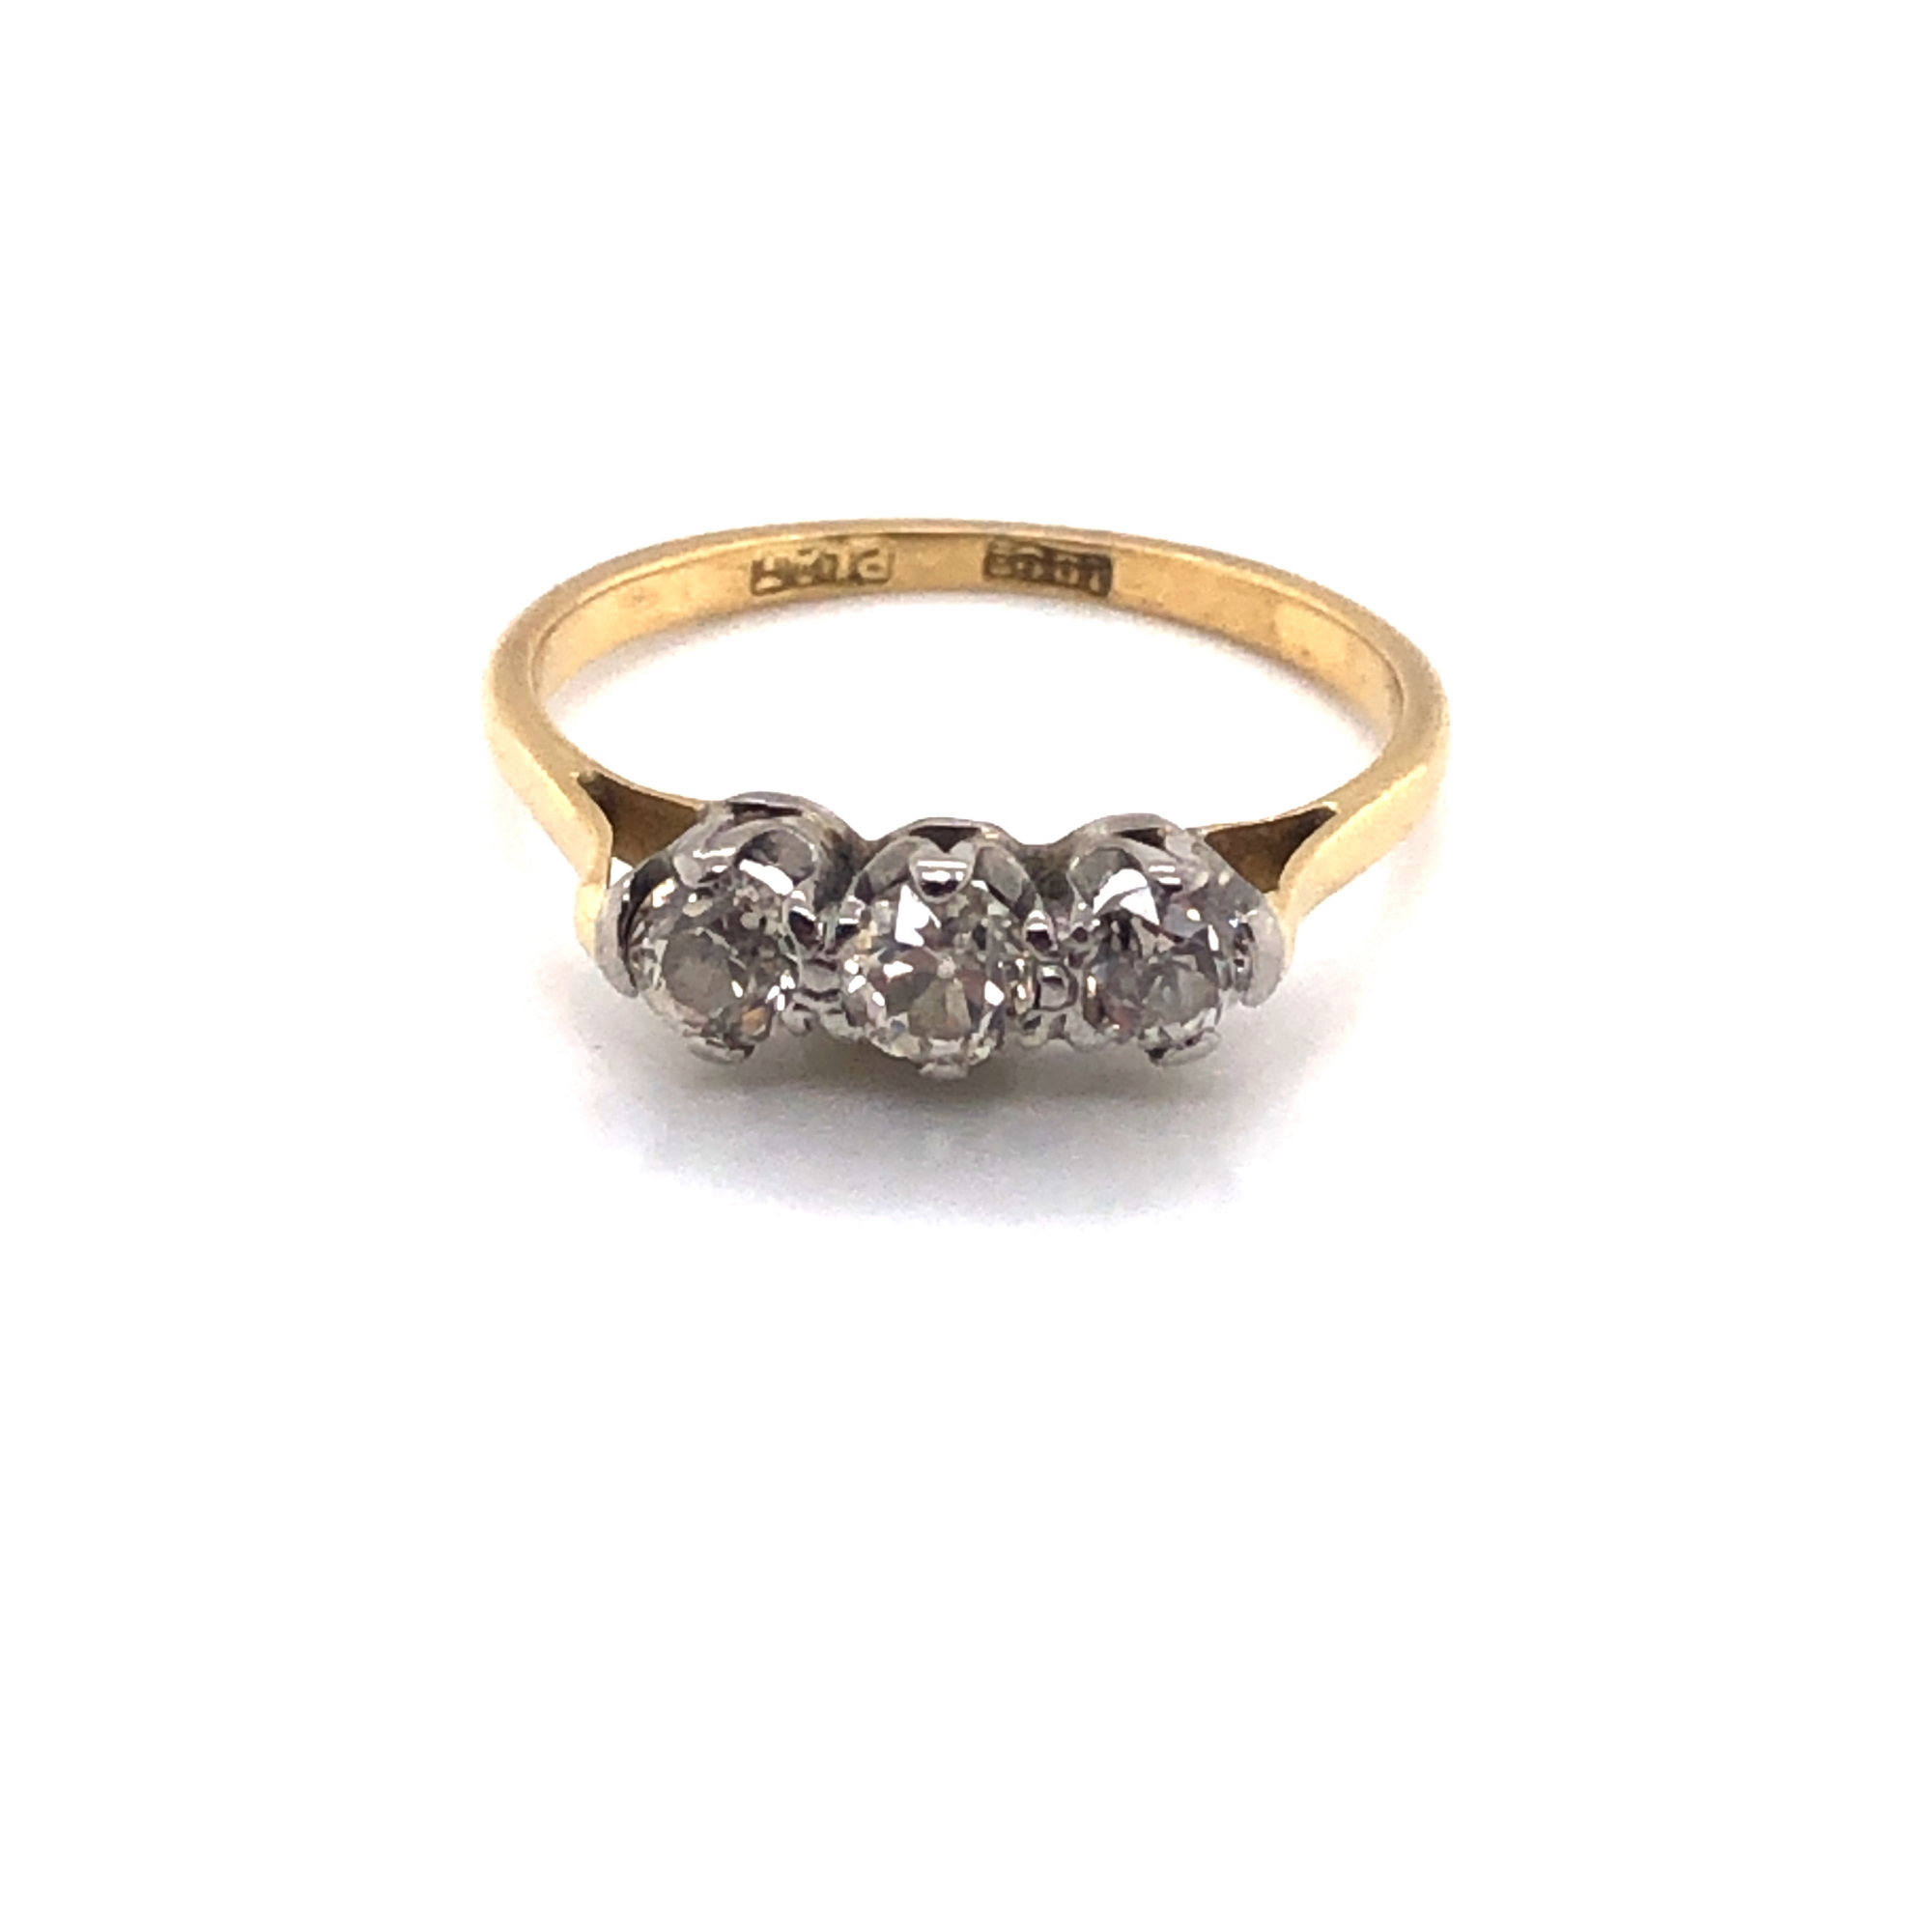 A DIAMOND THREE STONE OLD CUT RING. THE INSIDE SHANK STAMPED 18ct PLAT AND ASSESSED AS AN 18ct - Image 3 of 9